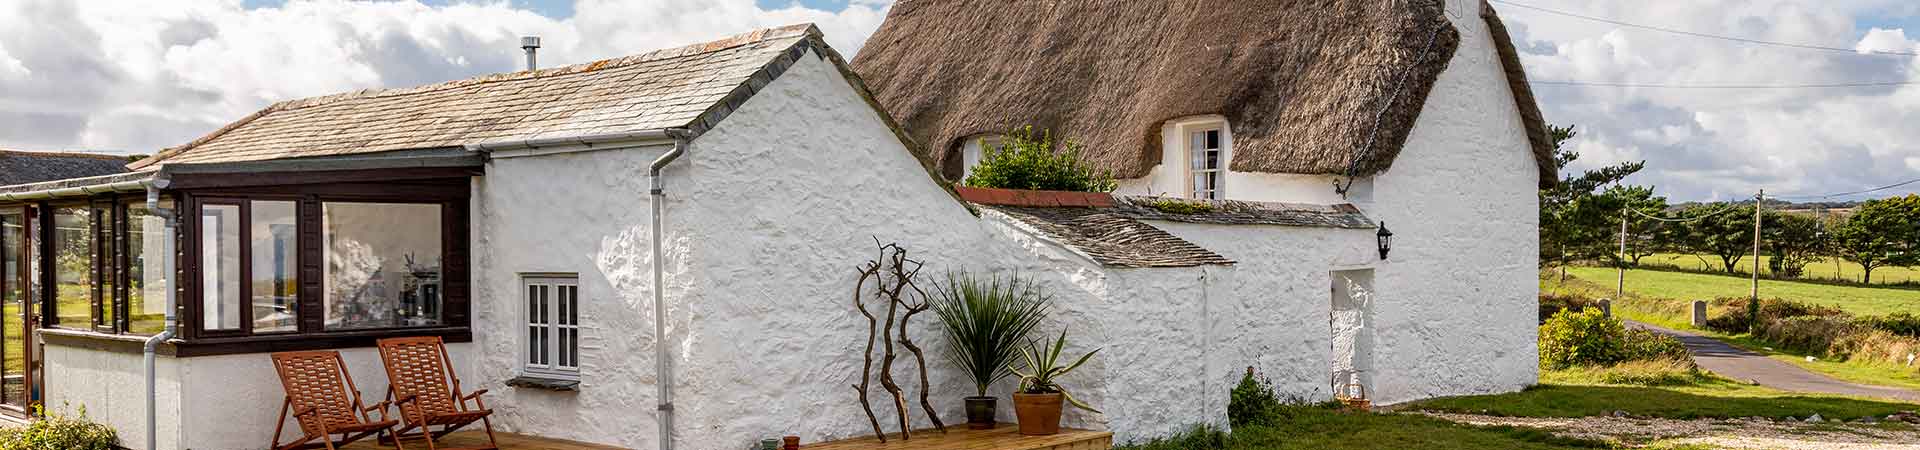 Thatched holiday cottages in Far West Cornwall